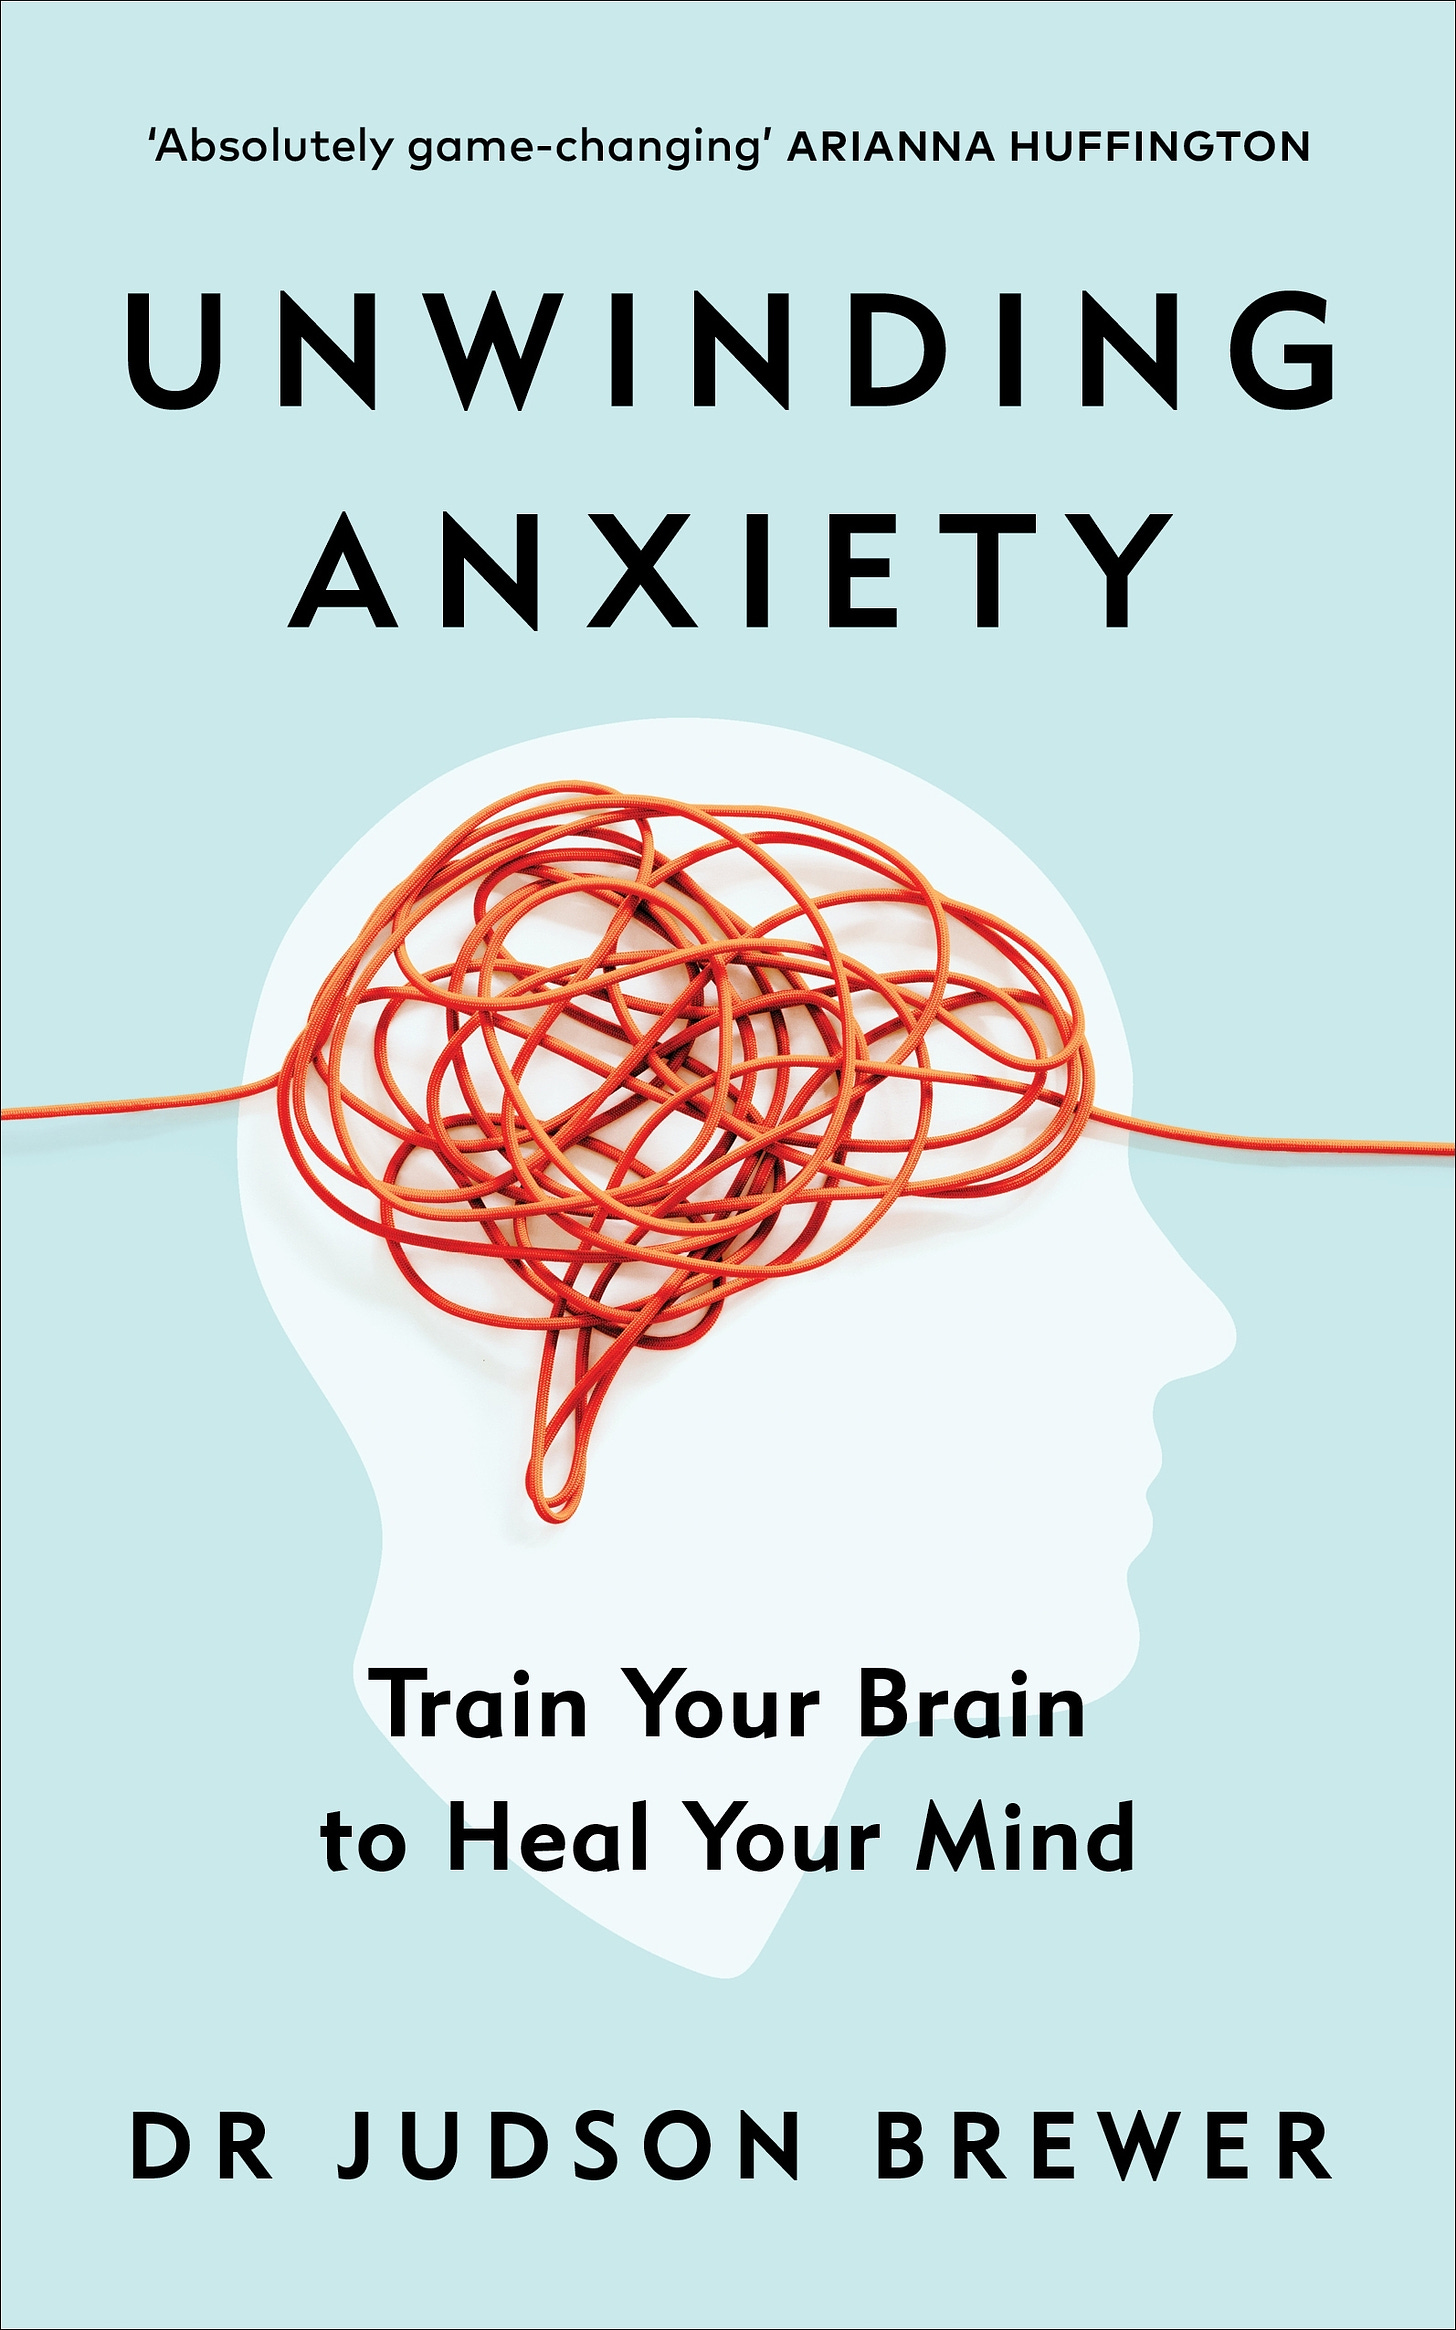 Book cover of Unwinding Anxiety by Dr. Judson Brewer